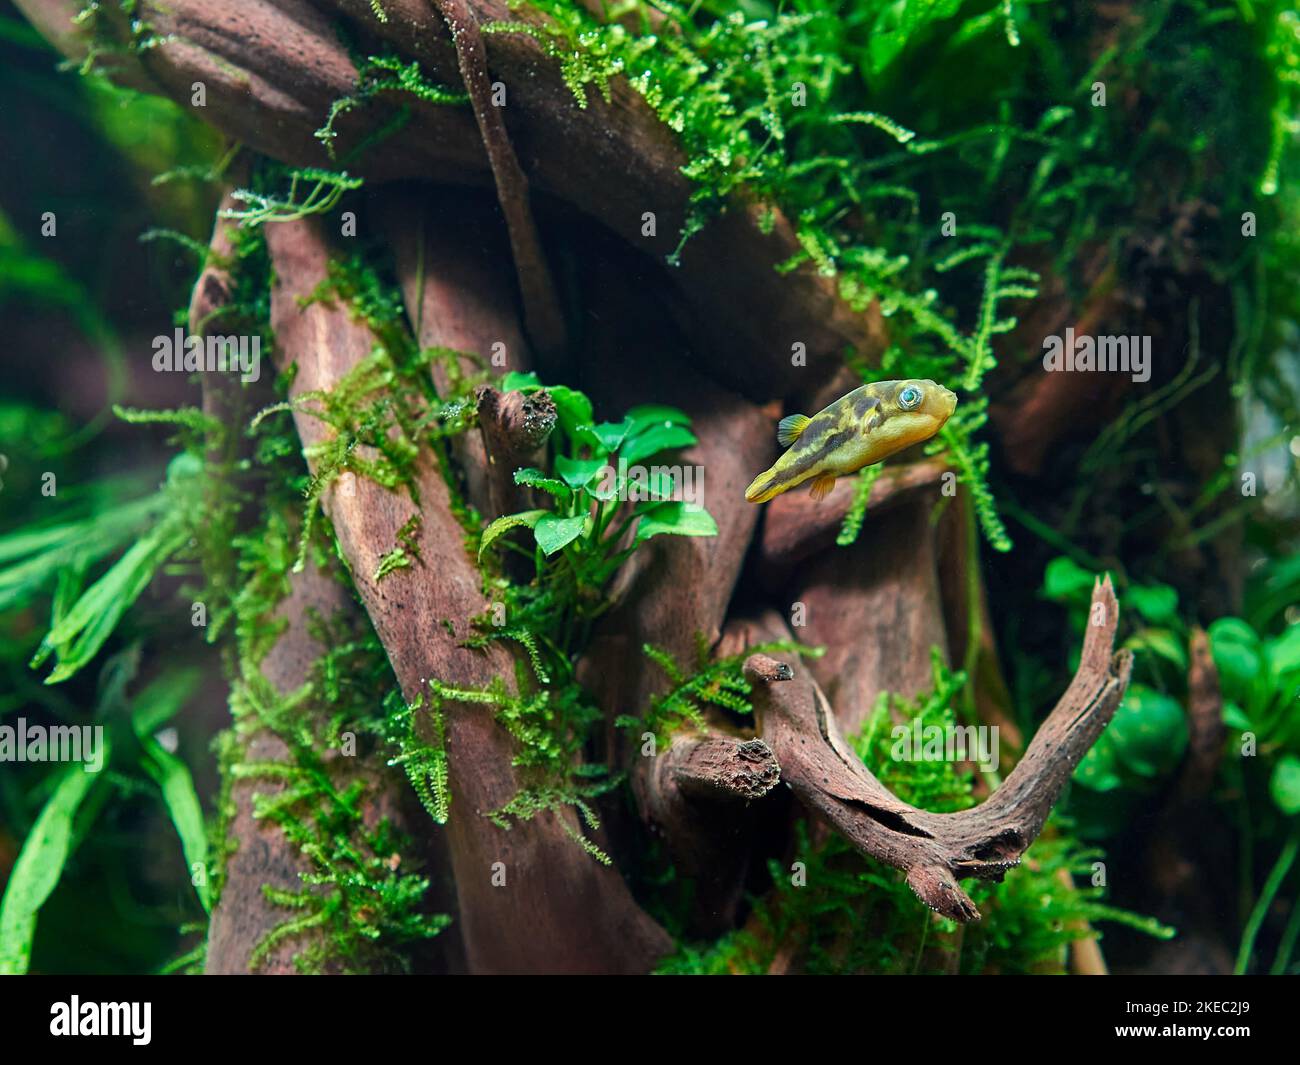 Dwarf pufferfish in the freshwater planted aquarium with big roots and moss Stock Photo